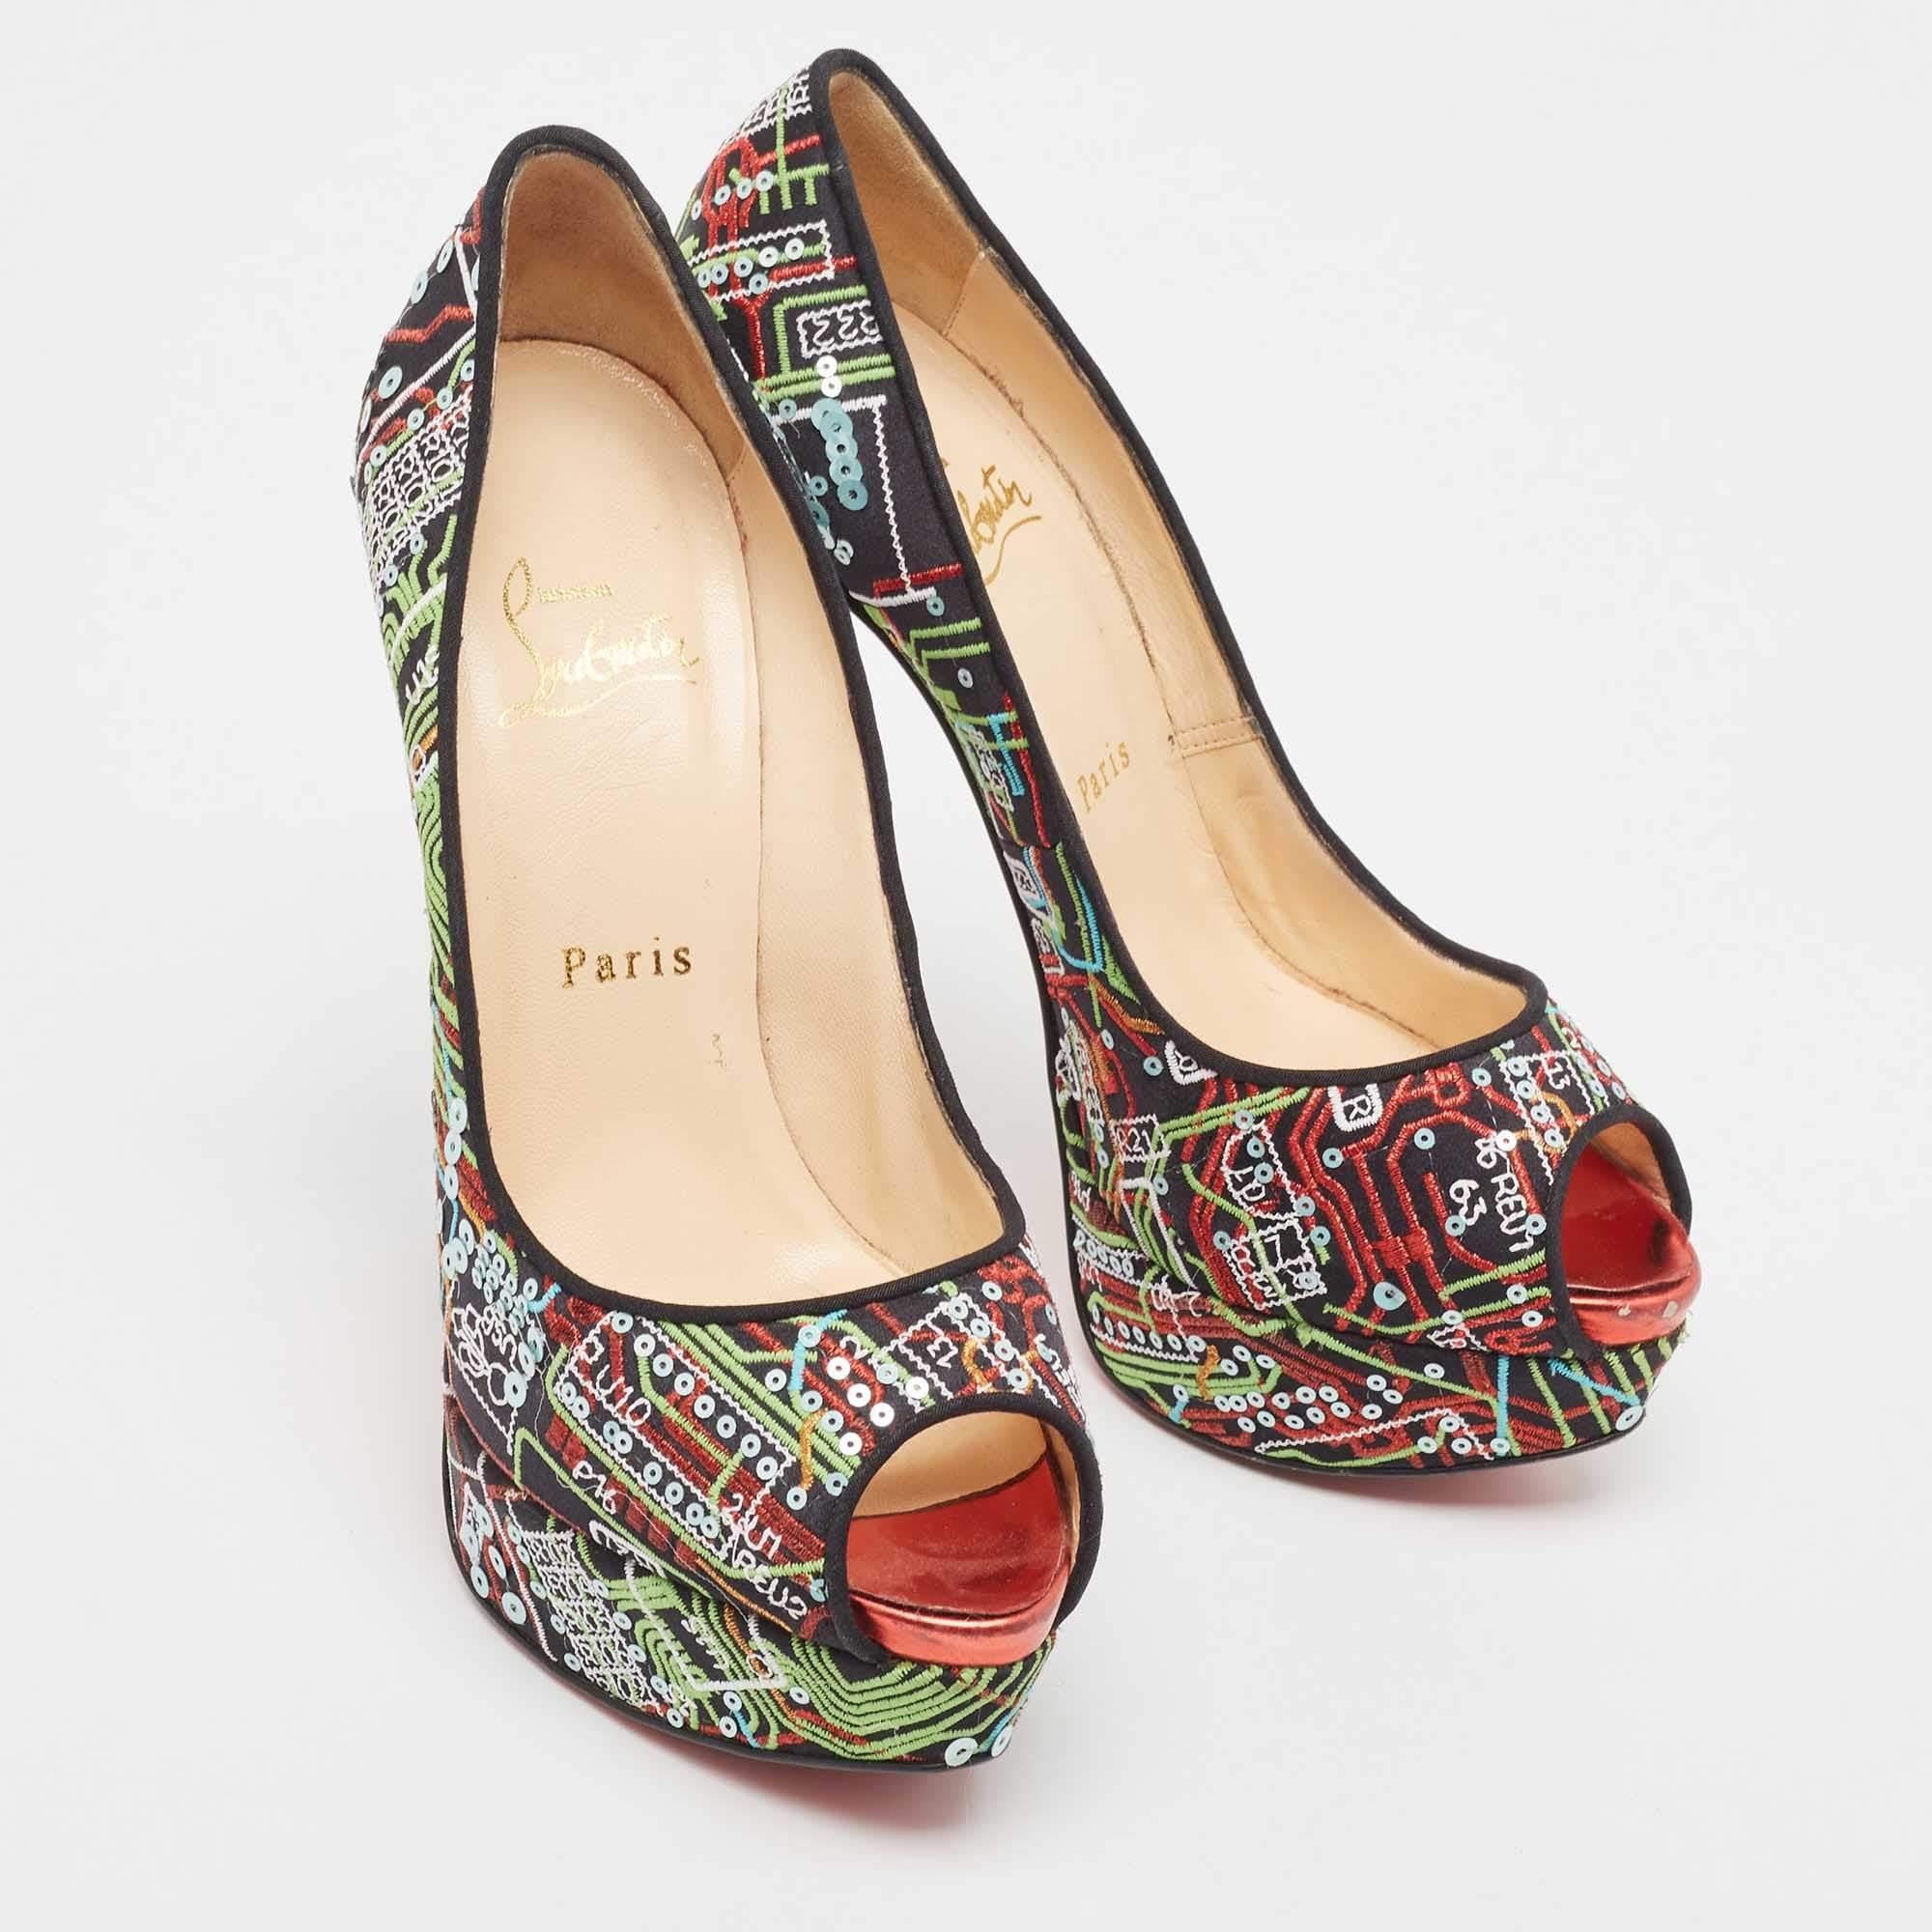 Women's Christian Louboutin Satin and Sequin Embellishments Lady Peep Toe Pumps Size For Sale